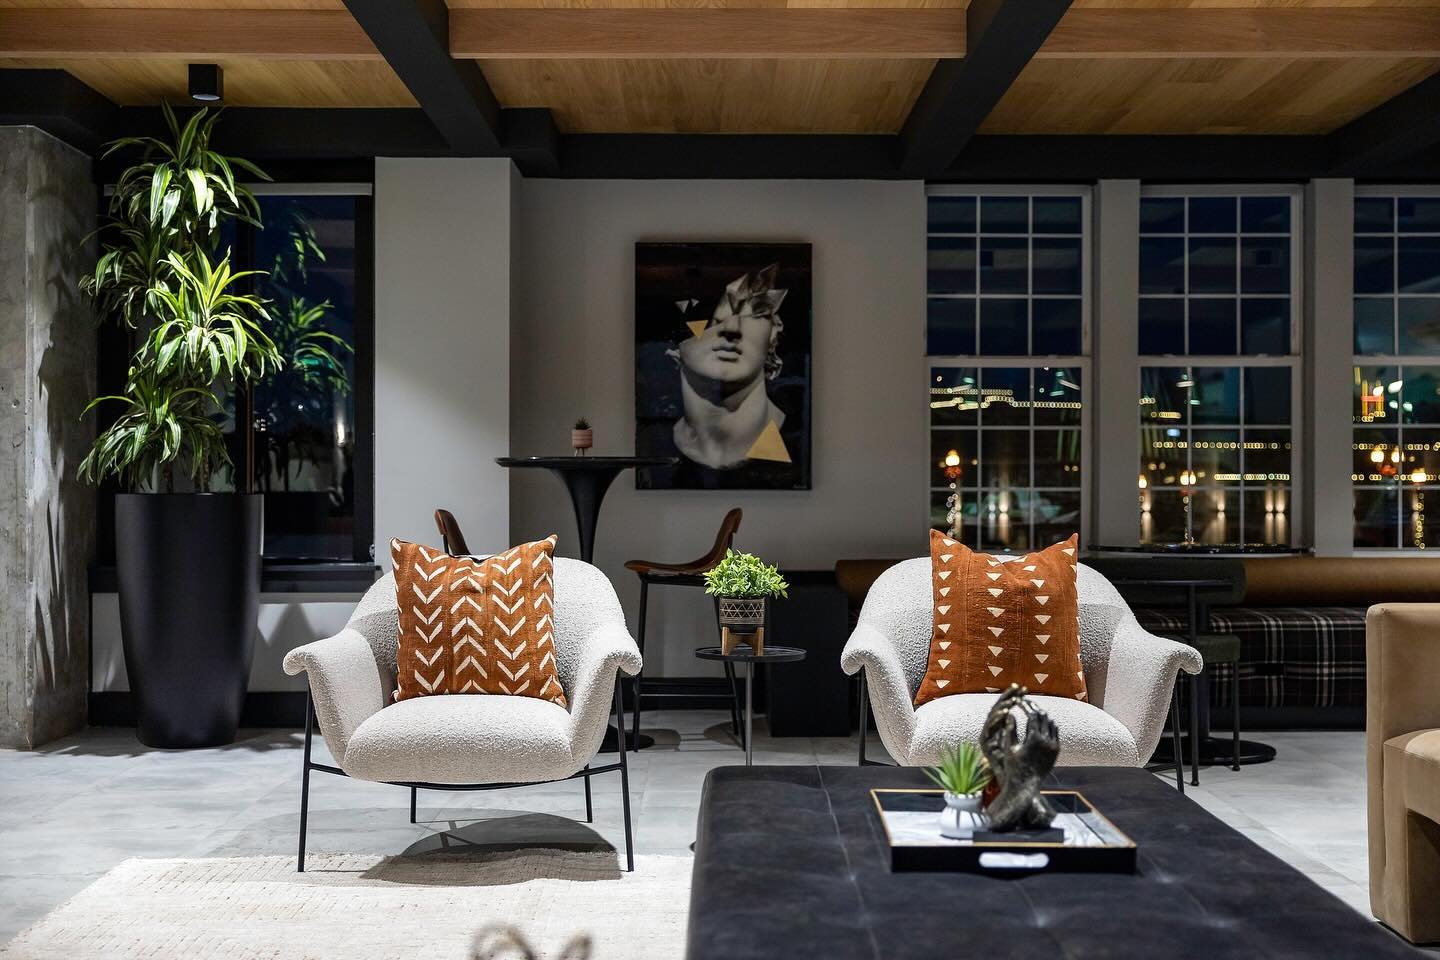 Congratulations to @coopercarry_interiorsstudio Solis Sugarhill for Best of Multi Family!

Solis Sugar Hill, integrates elements of a traditionally industrial building while providing a more polished look. Mixed metals, bold lighting elements, expose